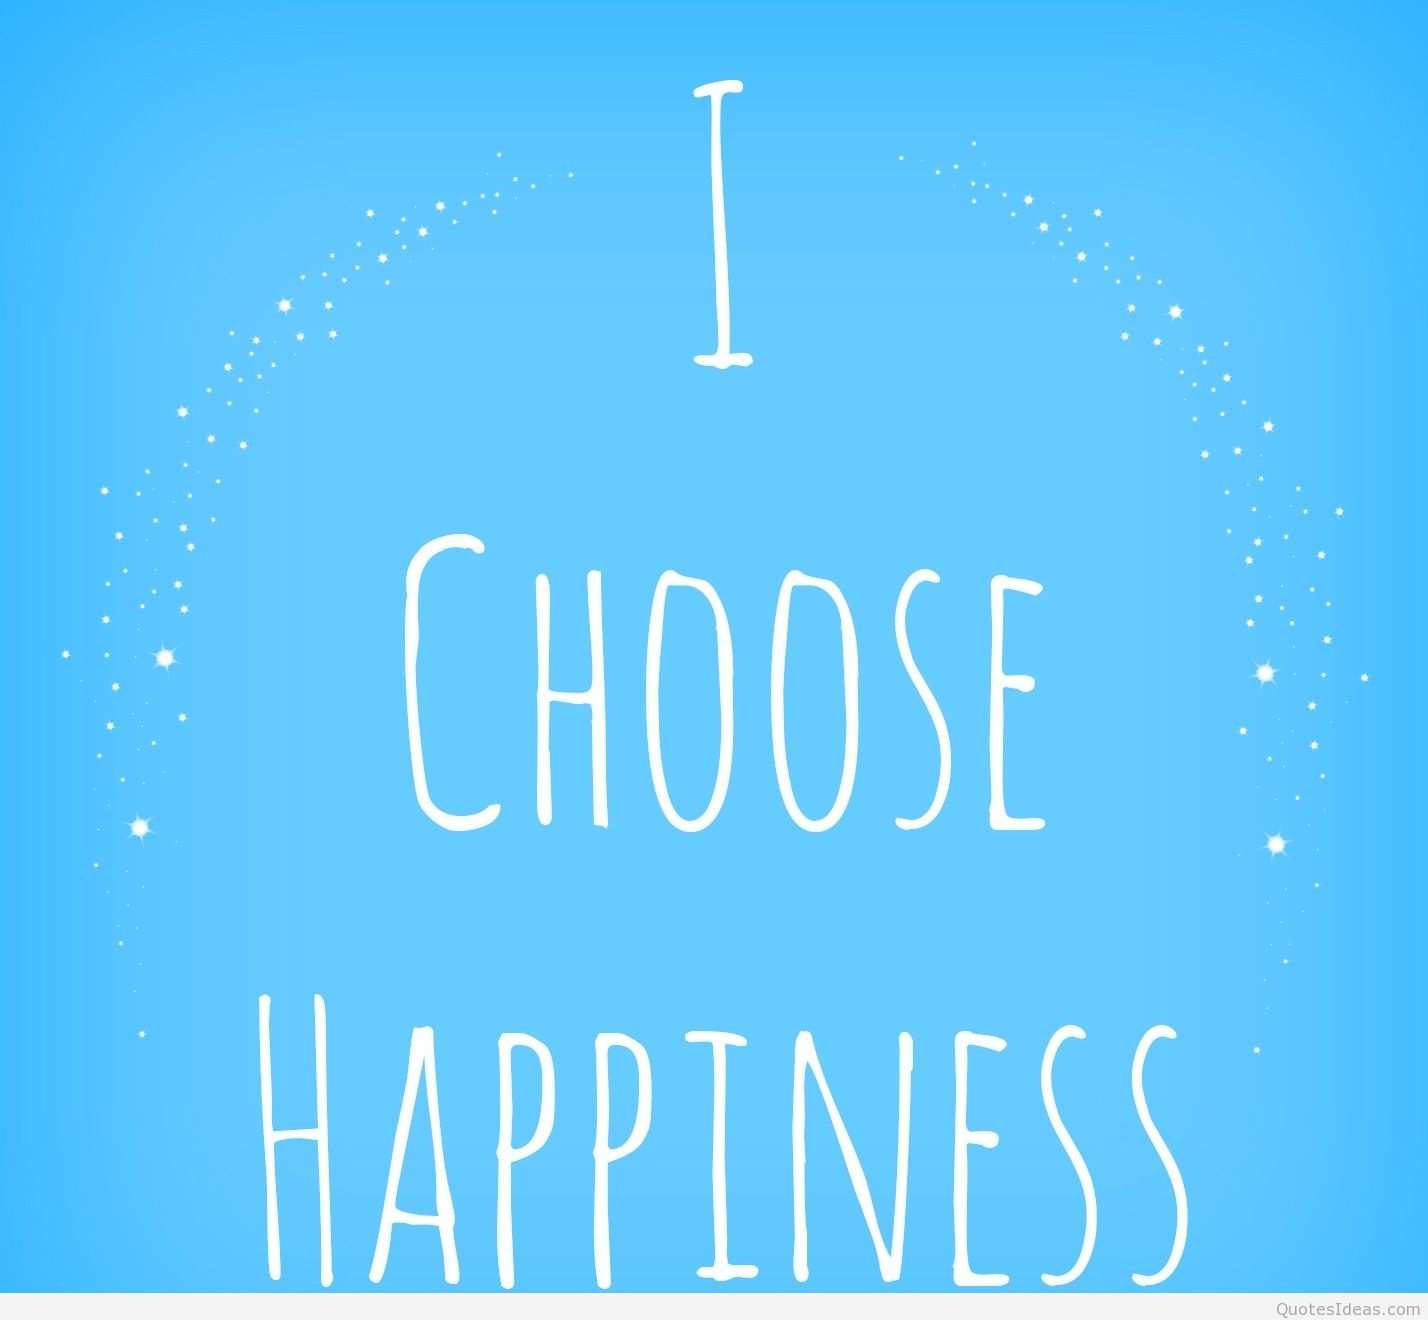 Happiness quotes backgrounds and images 2015 2016 1428x1320